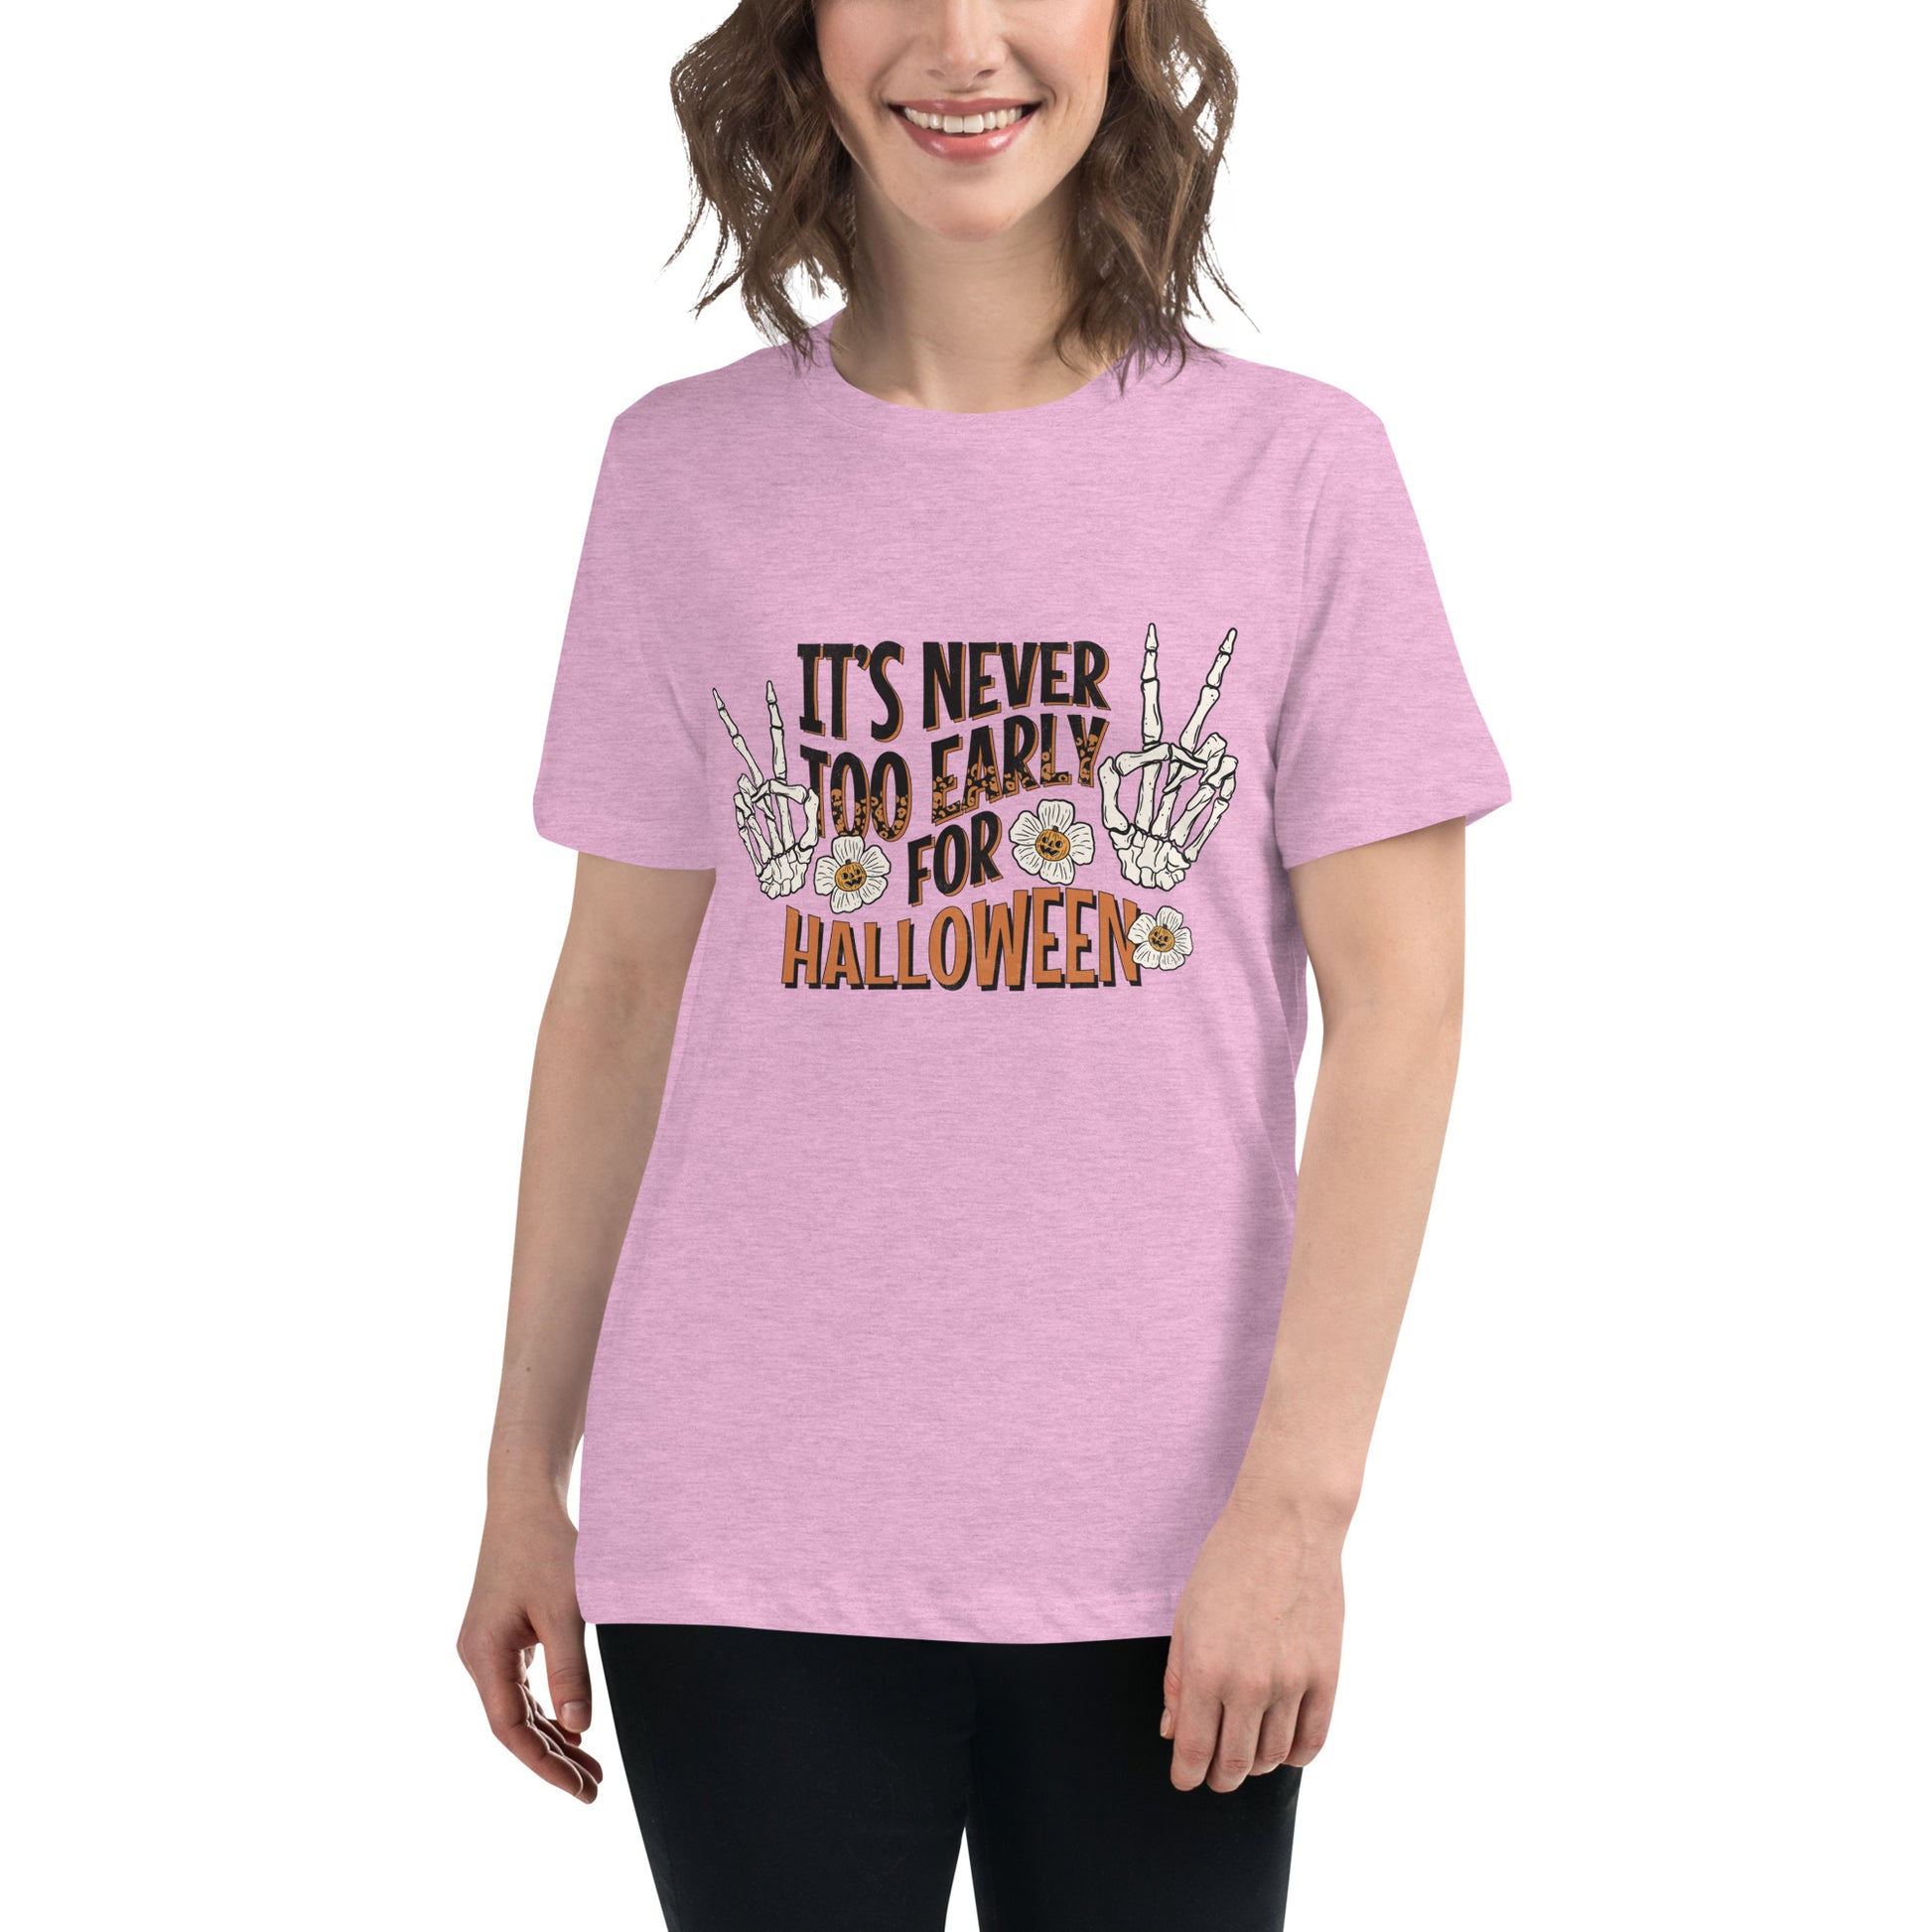 It's Never Too Early for Halloween Women's Relaxed T-Shirt Tee Tshirt